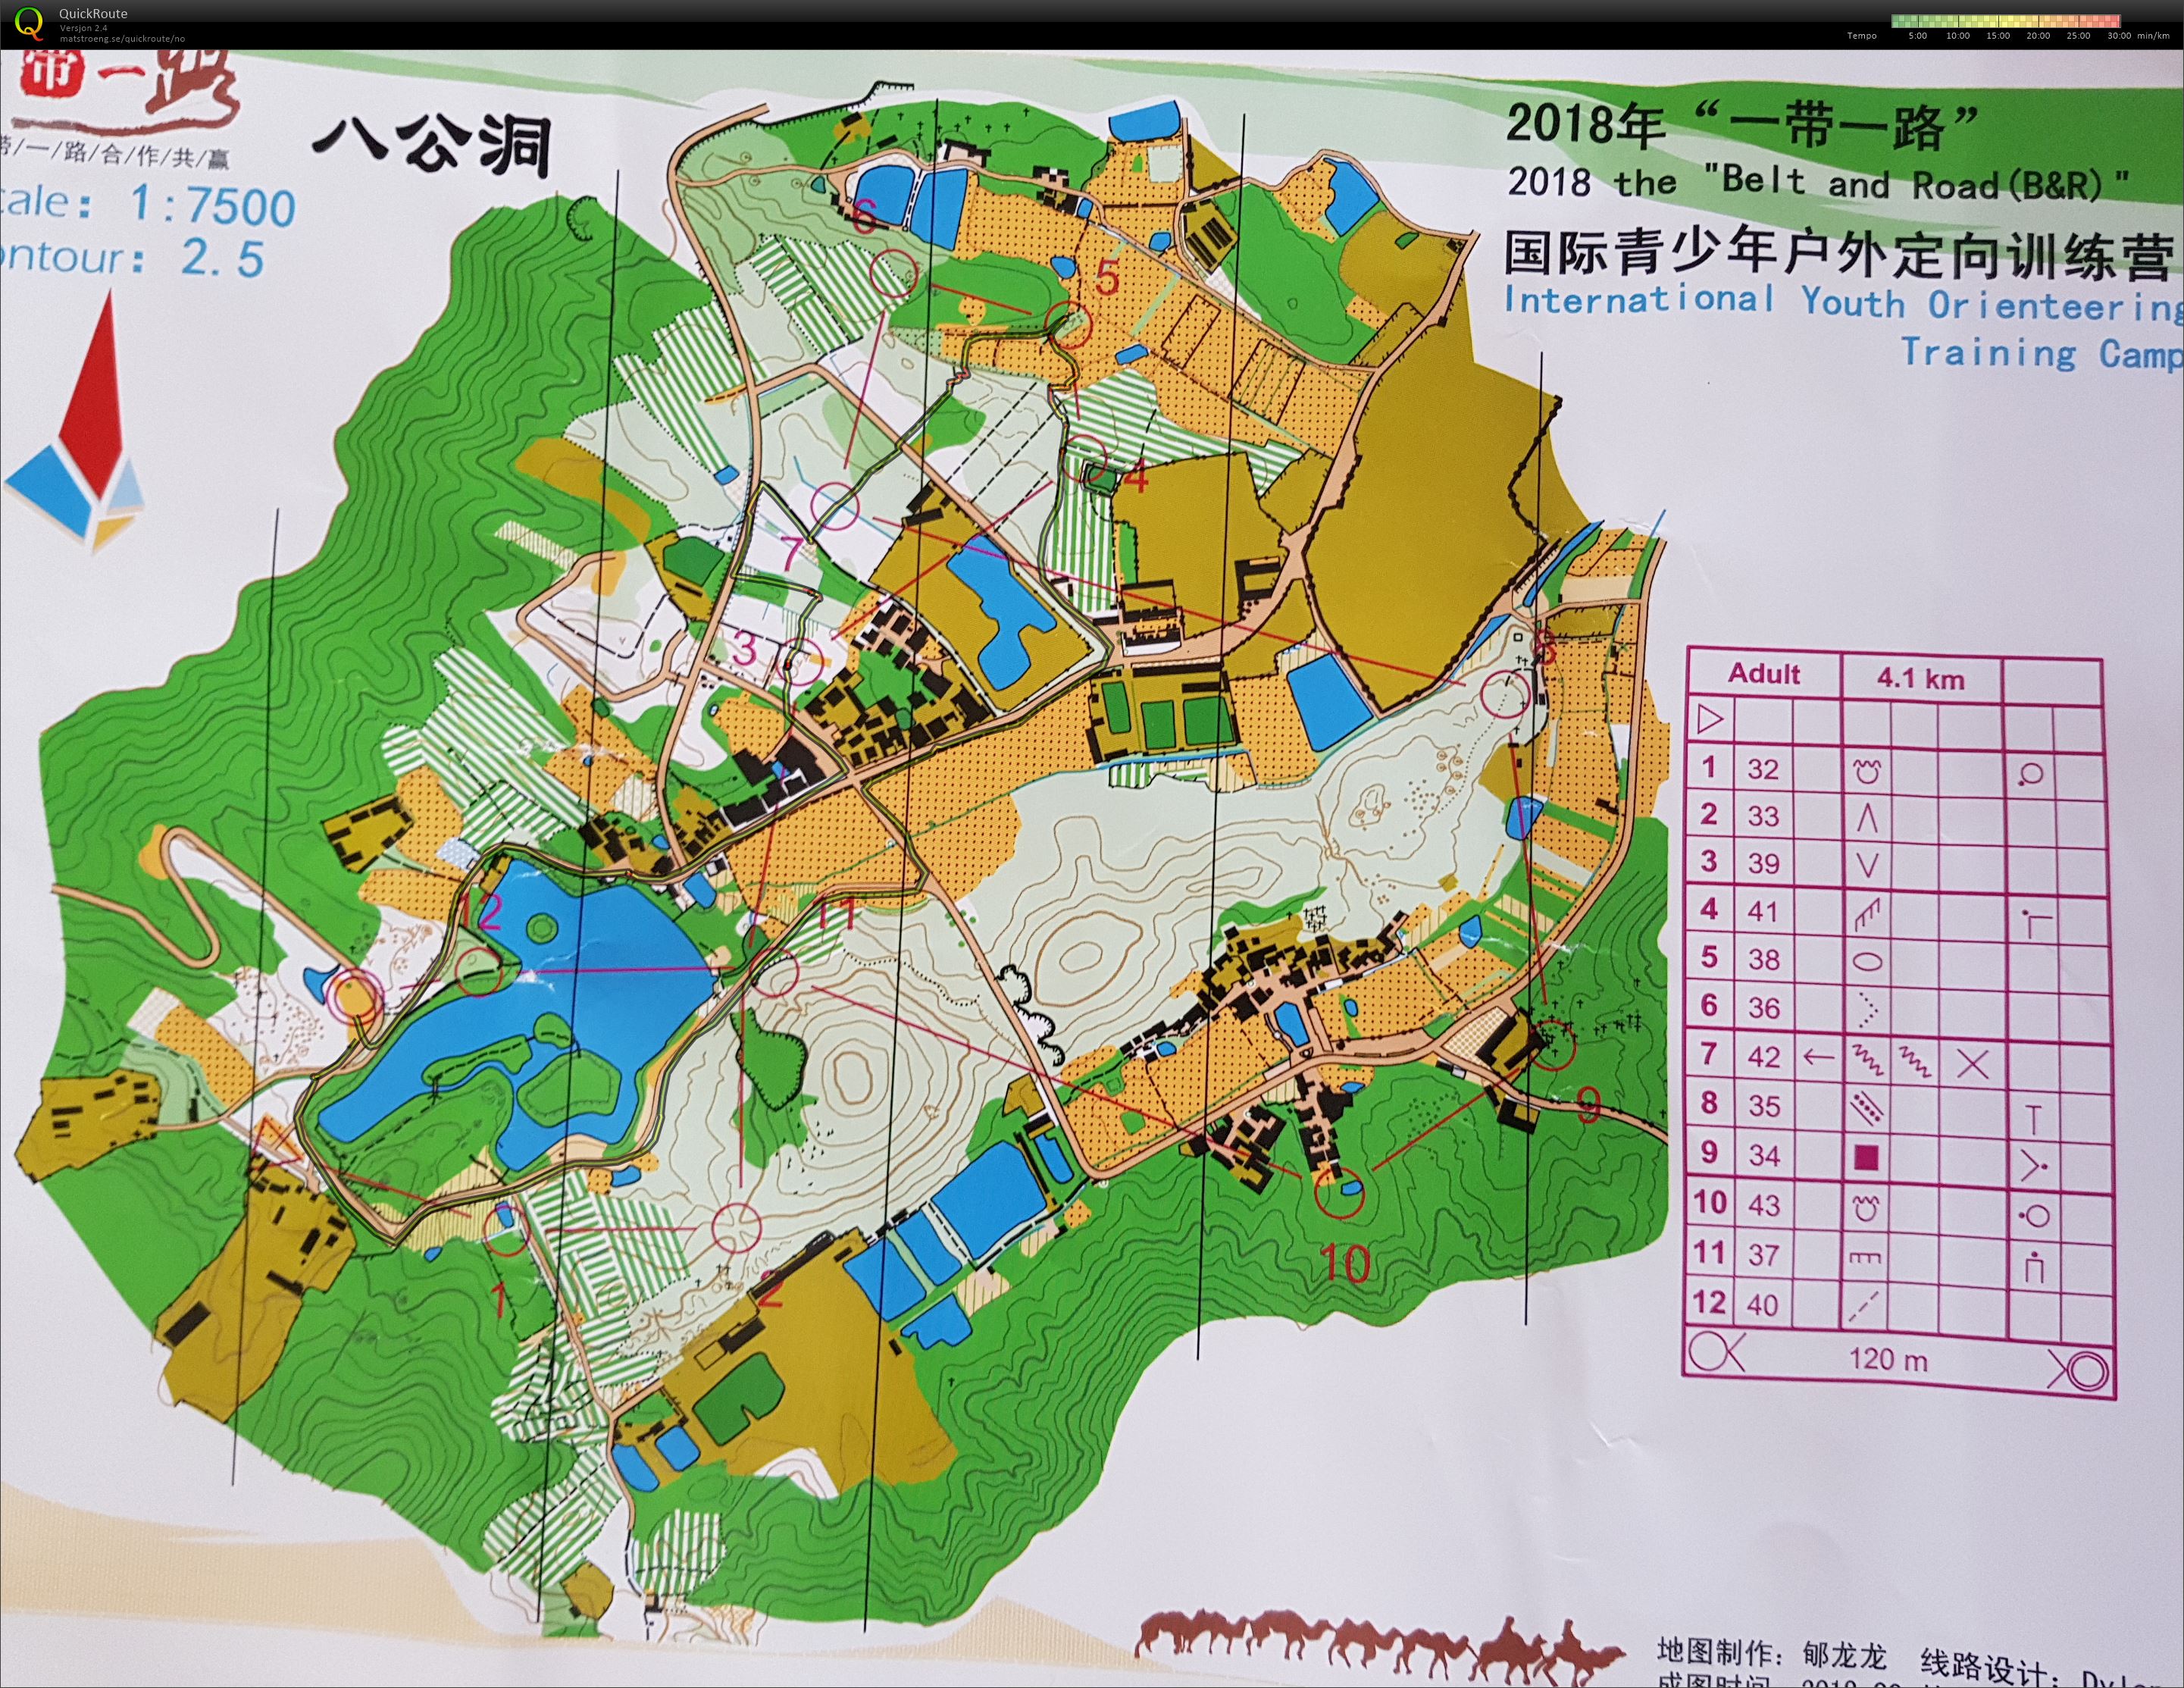 Belt and Road International Youth Orienteering Camp (28/10/2018)